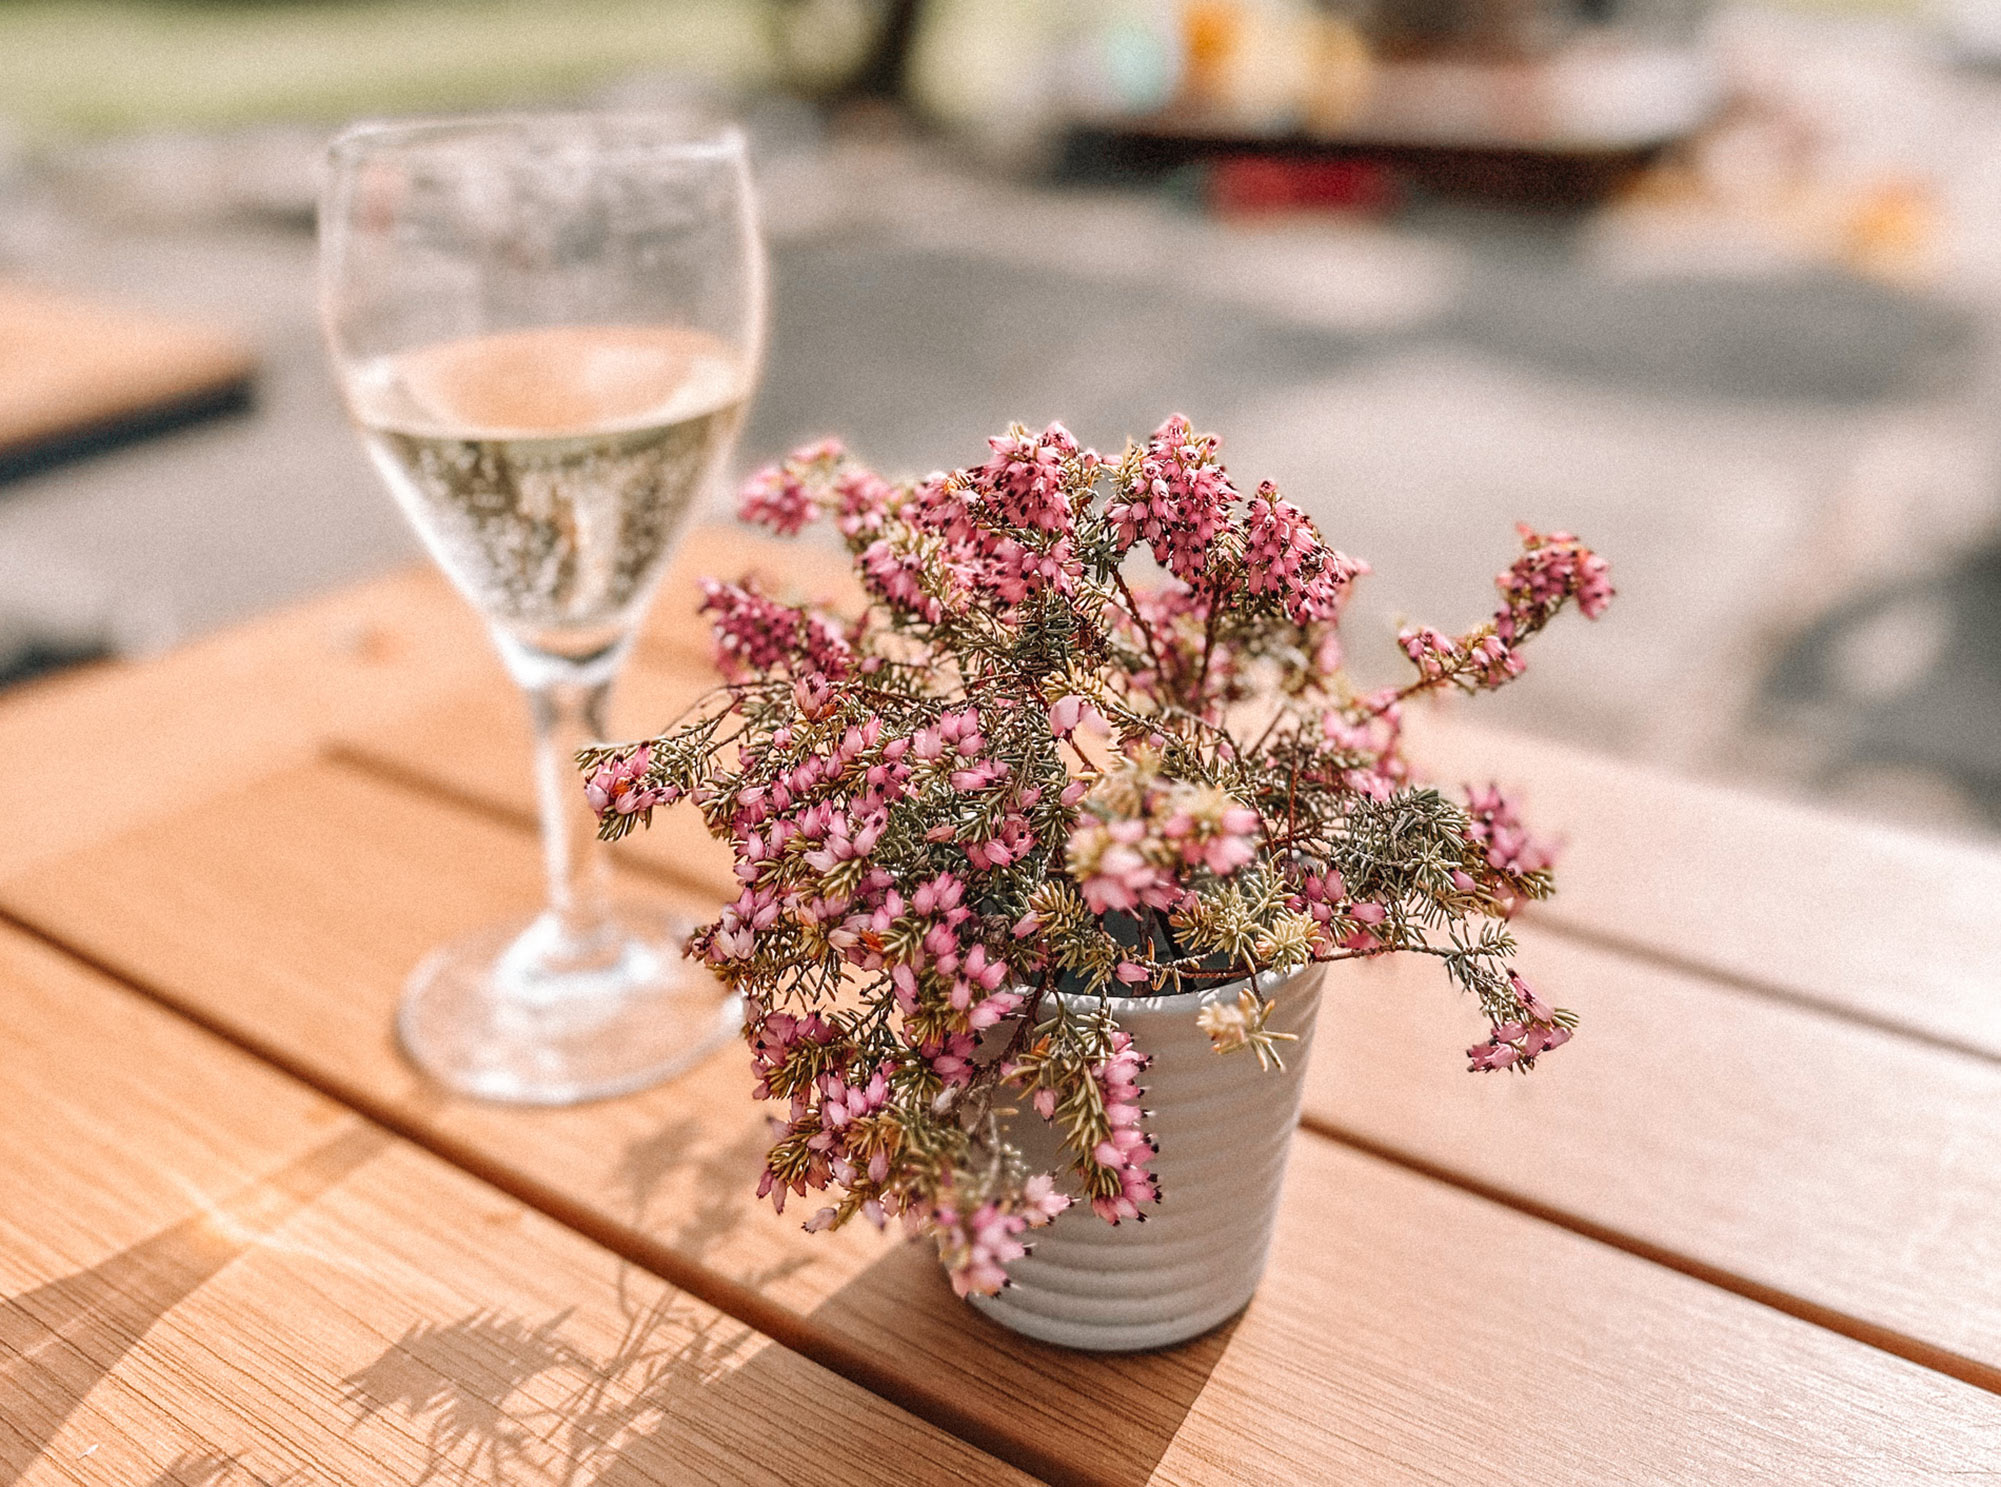 purple flowers and a glass of wine on a table in the sun